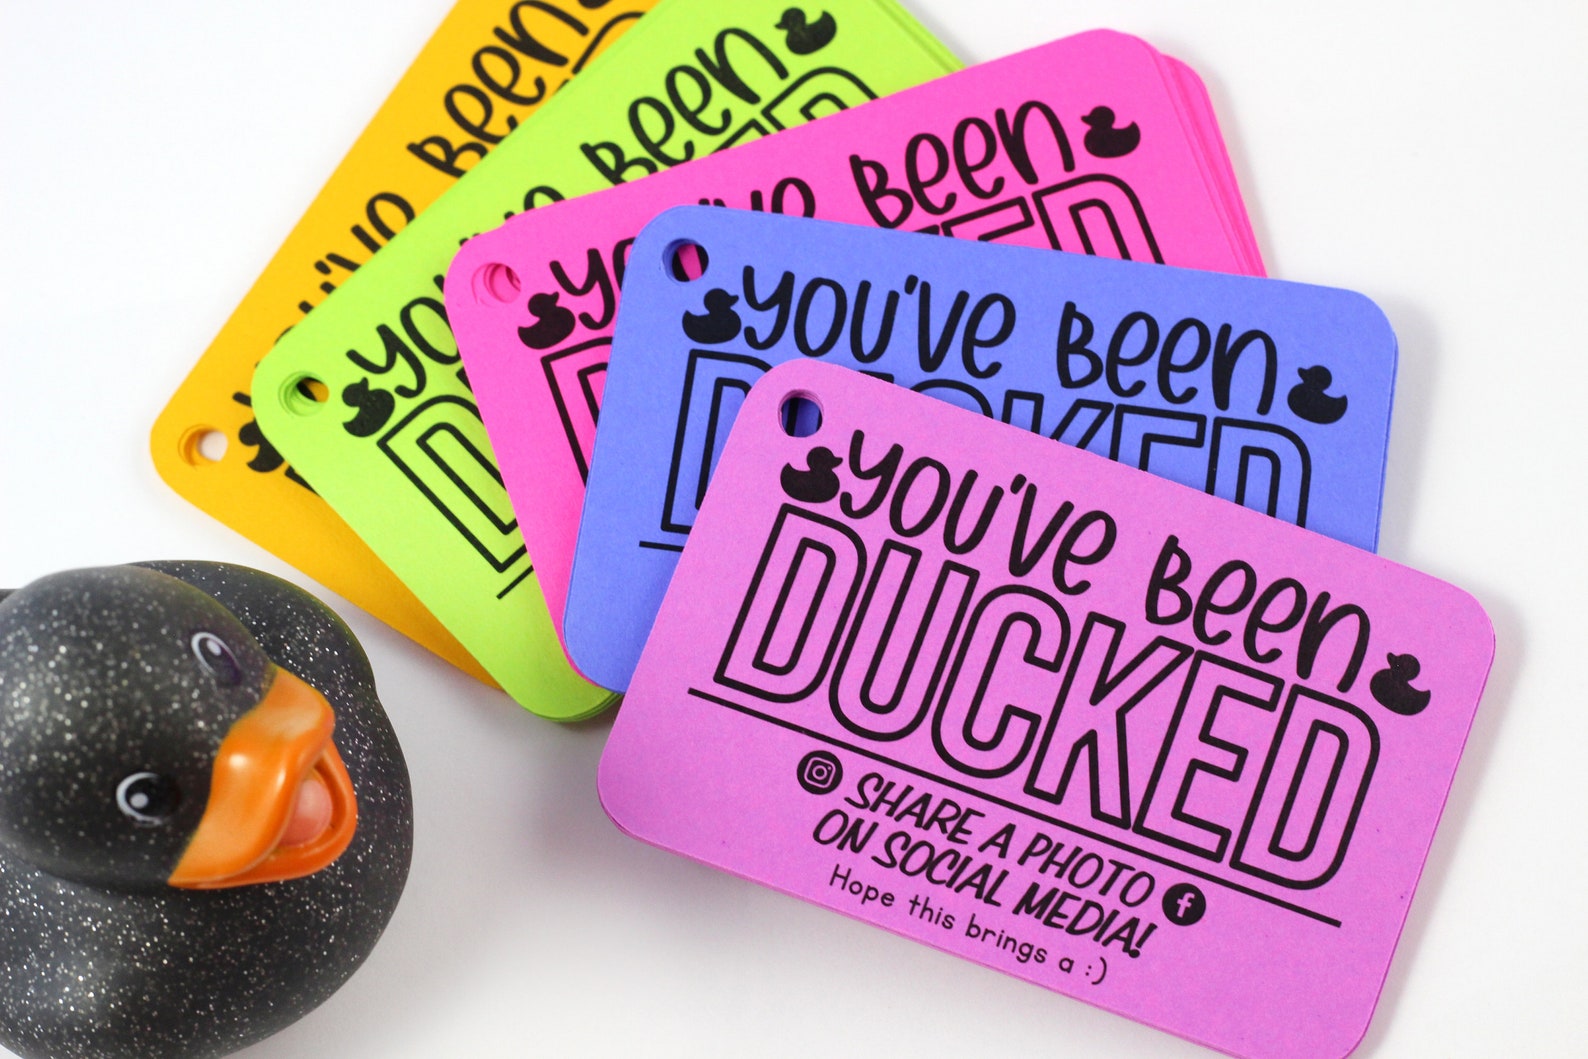 youve-been-ducked-duck-tags-ducking-tags-tags-for-etsy